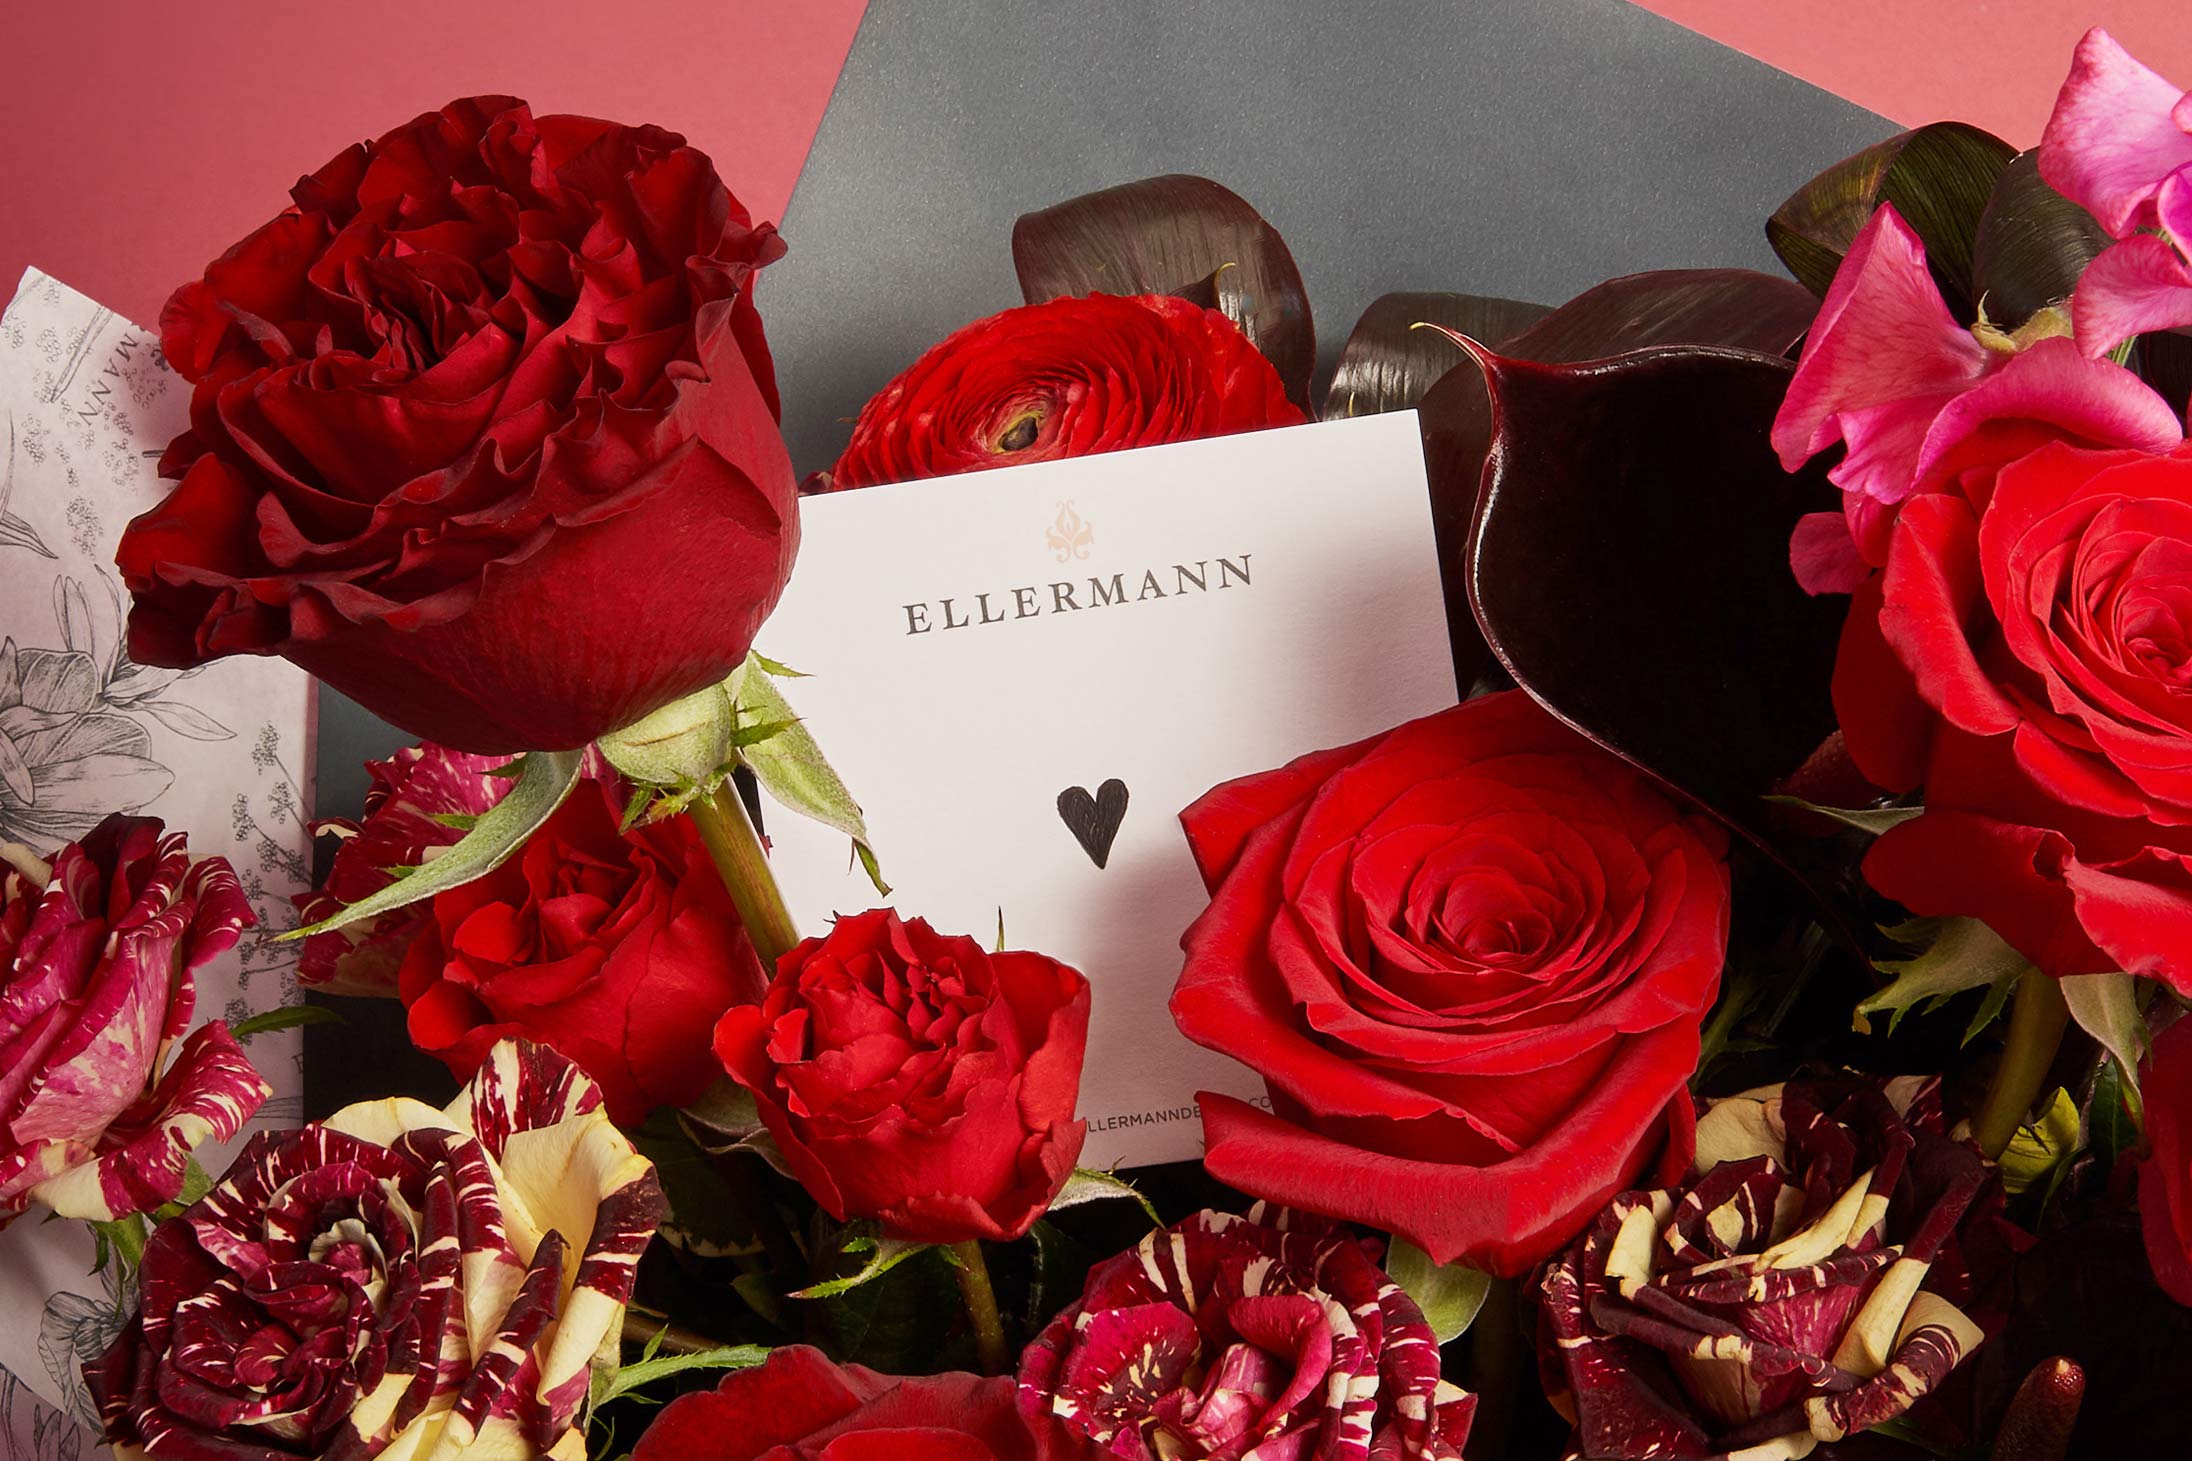 Ellermann flowers for Valentine's Day Pacific Place